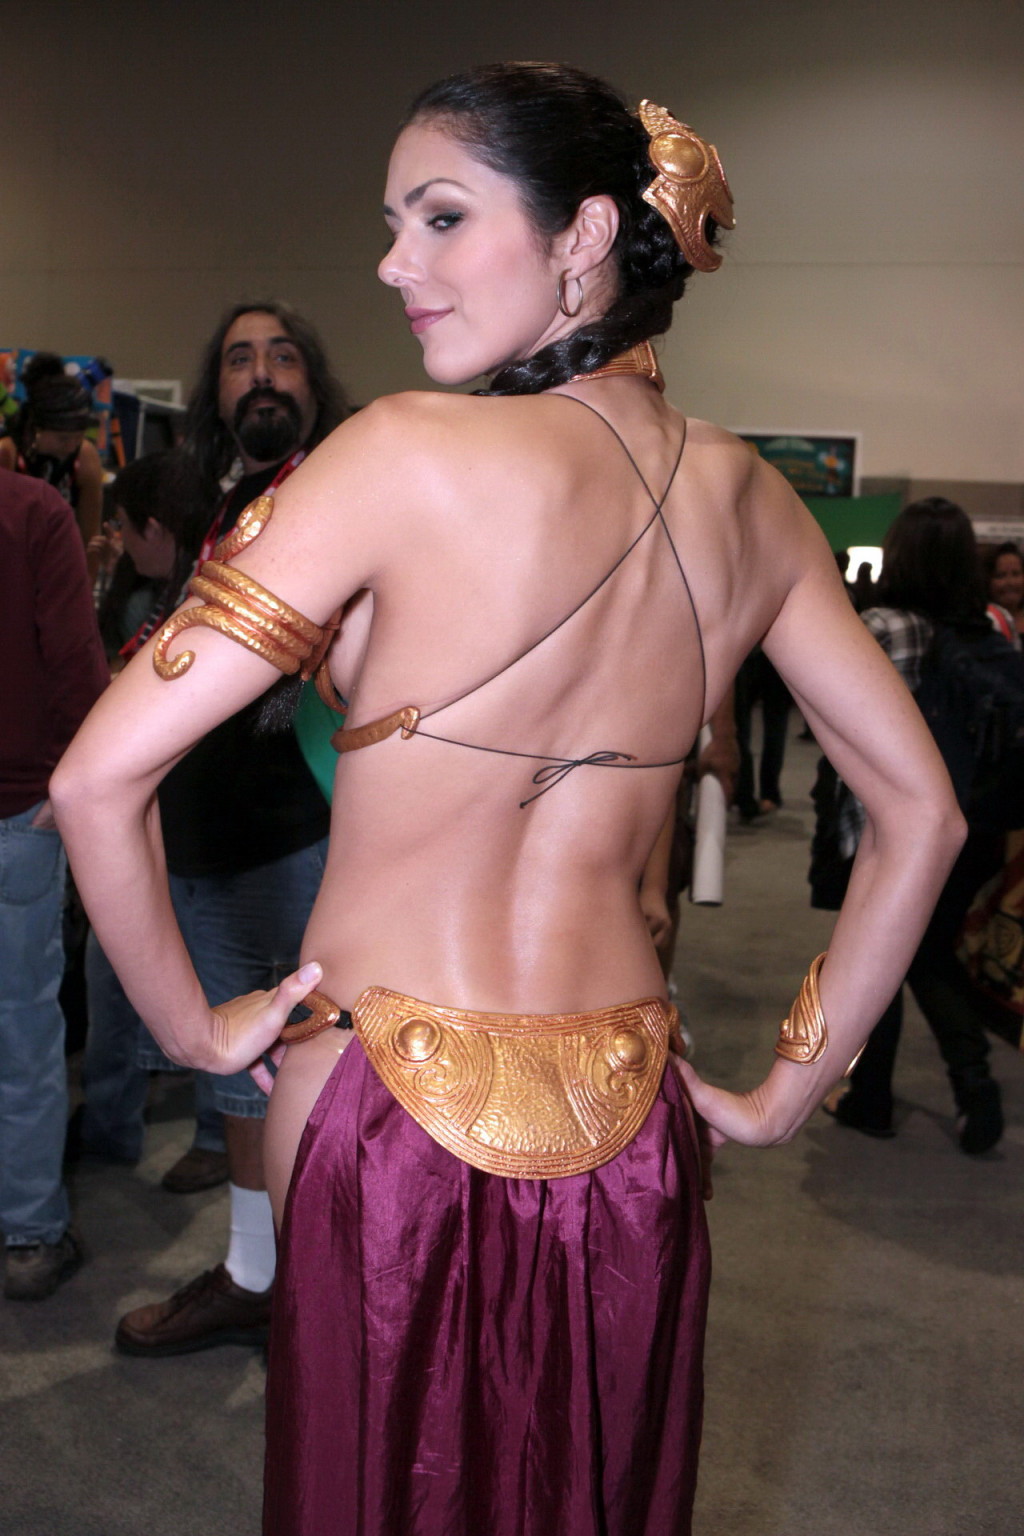 Adrianne Curry in sexy Princess Leia outfit at the Comic Con convention in San D #75339959